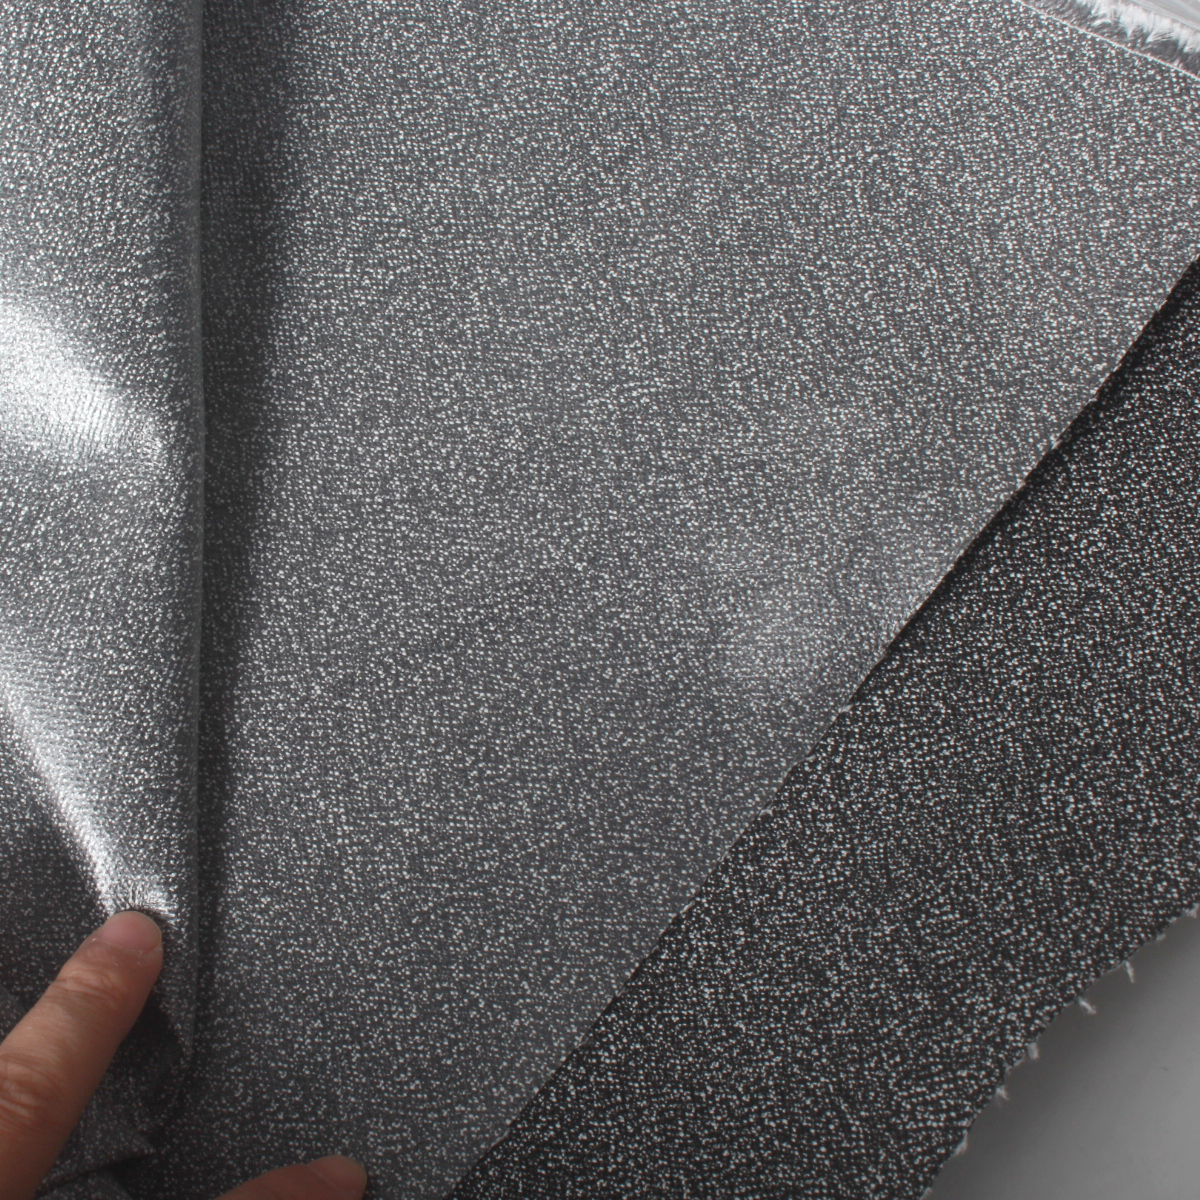 Jeely 300gsm Cut Resistant and Waterproof UHMWPE Woven Fabric With TPU Coating